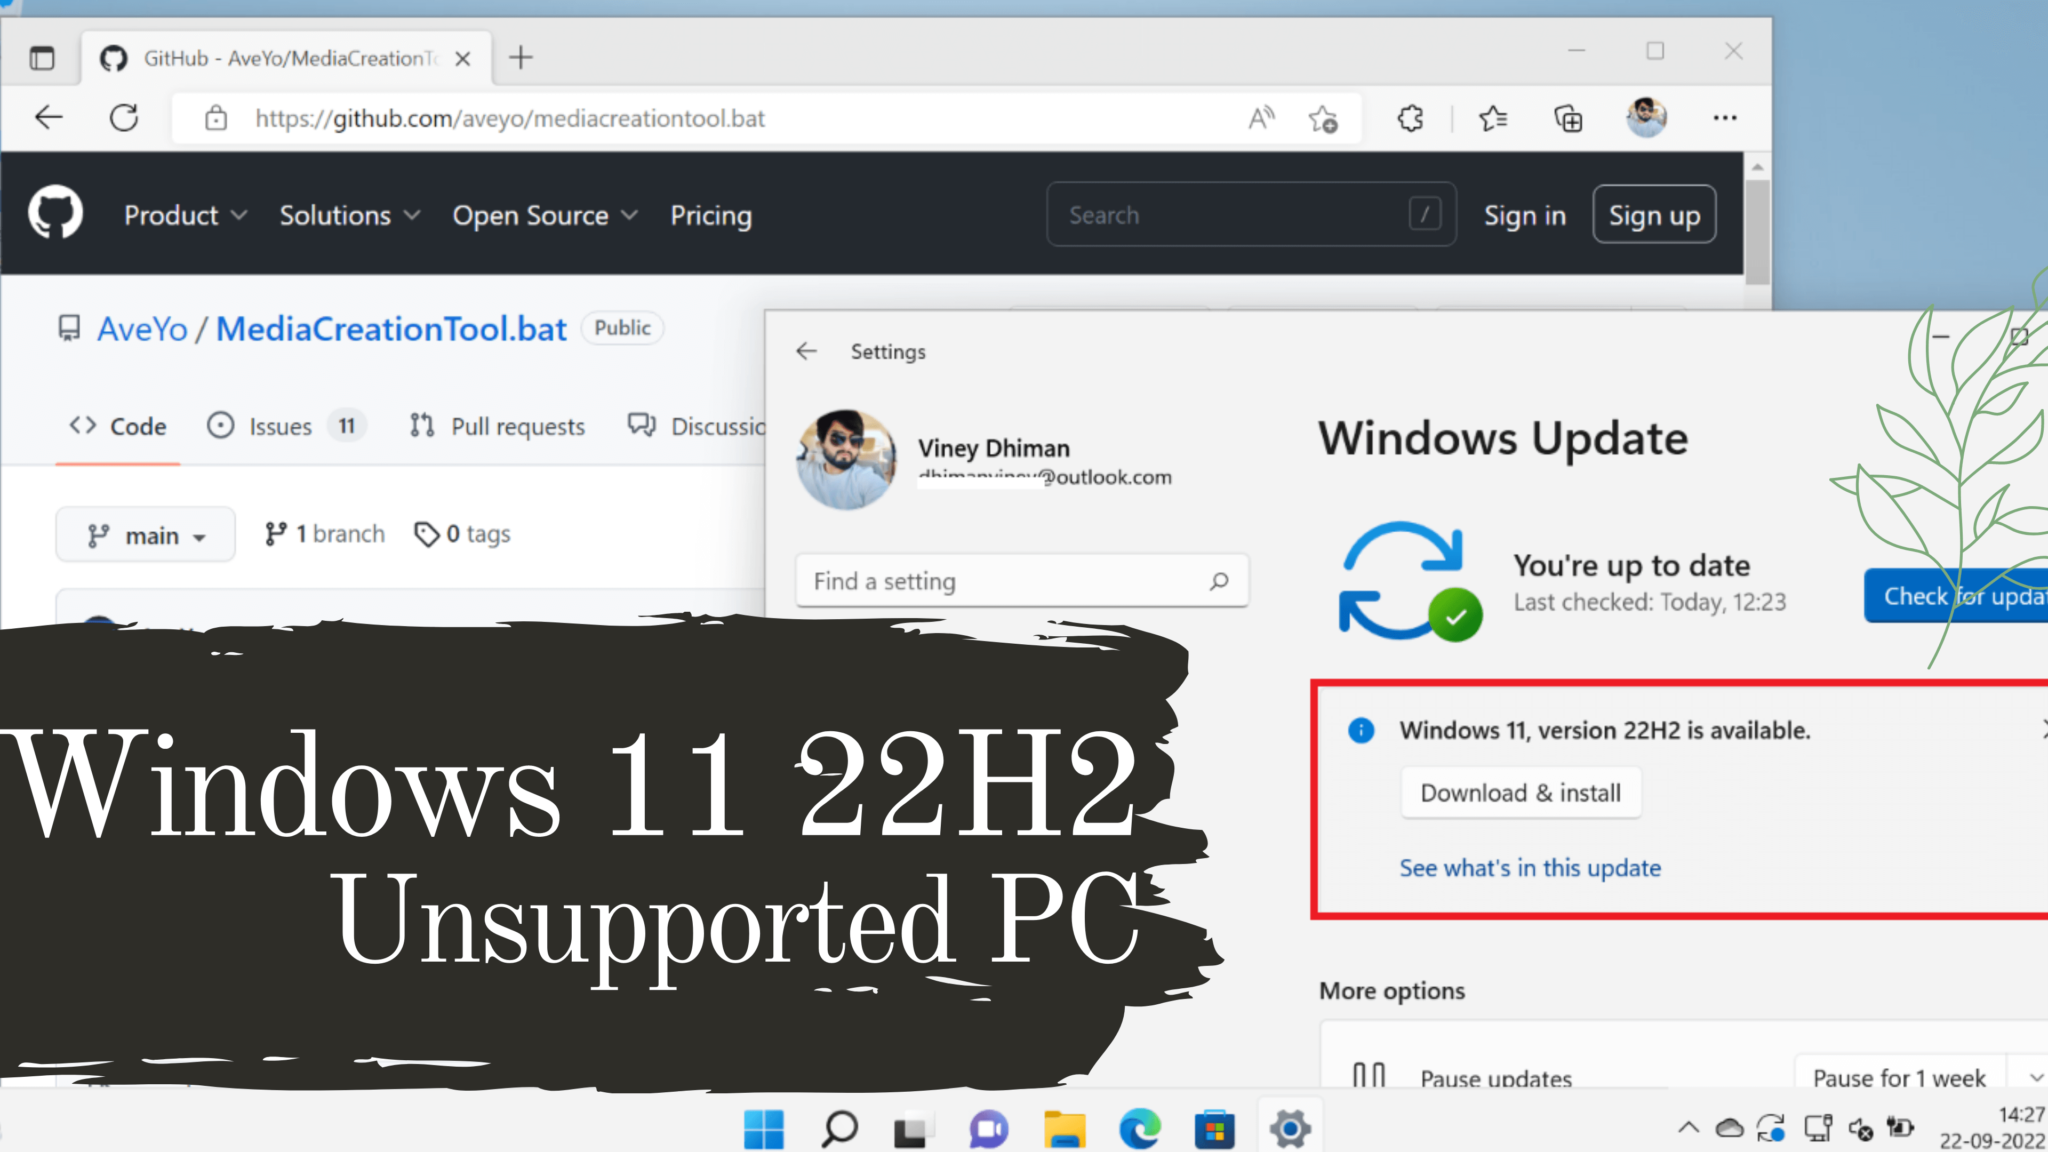 install windows 11 on unsupported pc